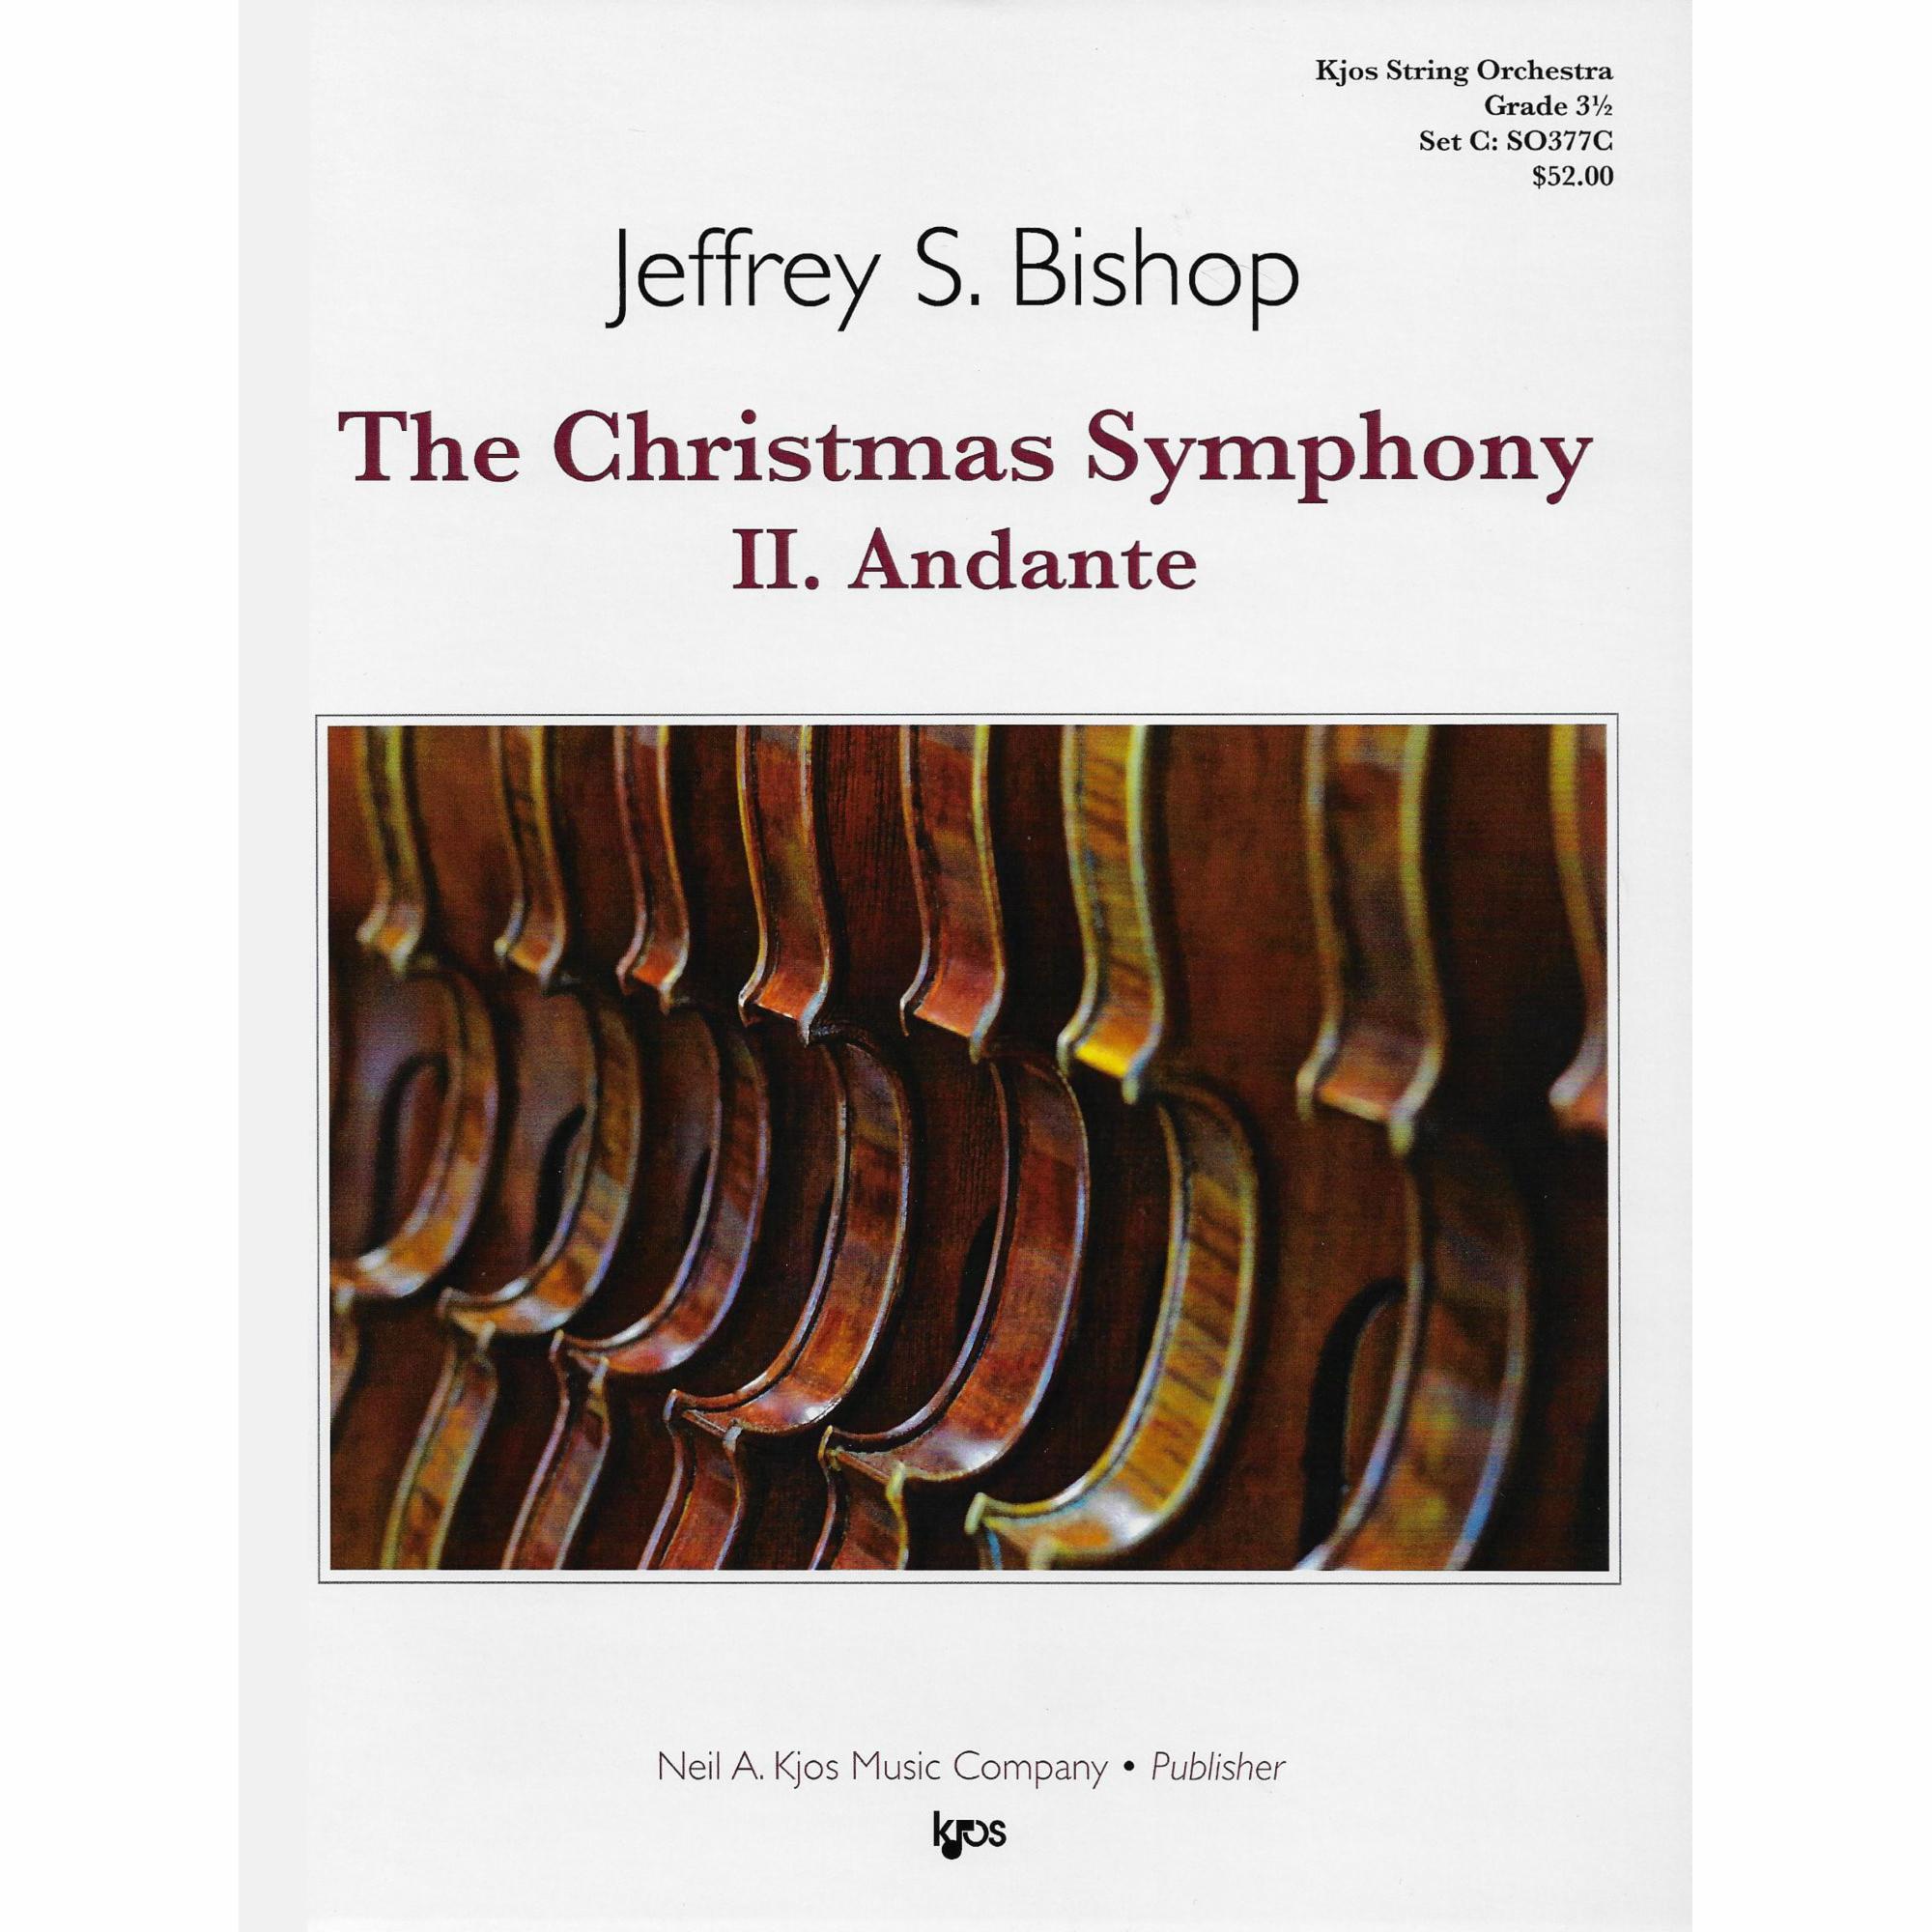 The Christmas Symphony: ll. Andante for String Orchestra